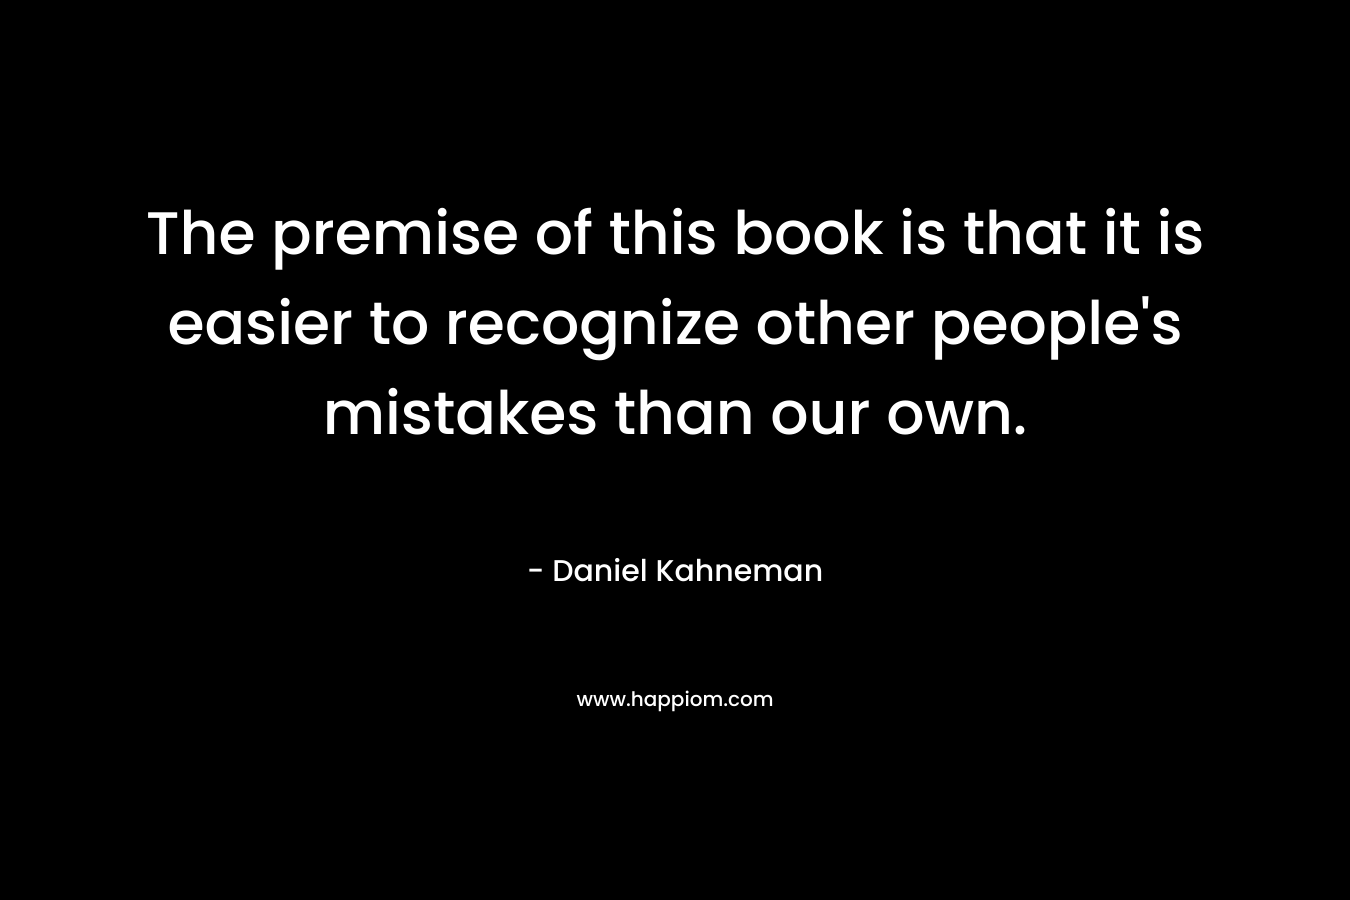 The premise of this book is that it is easier to recognize other people’s mistakes than our own. – Daniel Kahneman